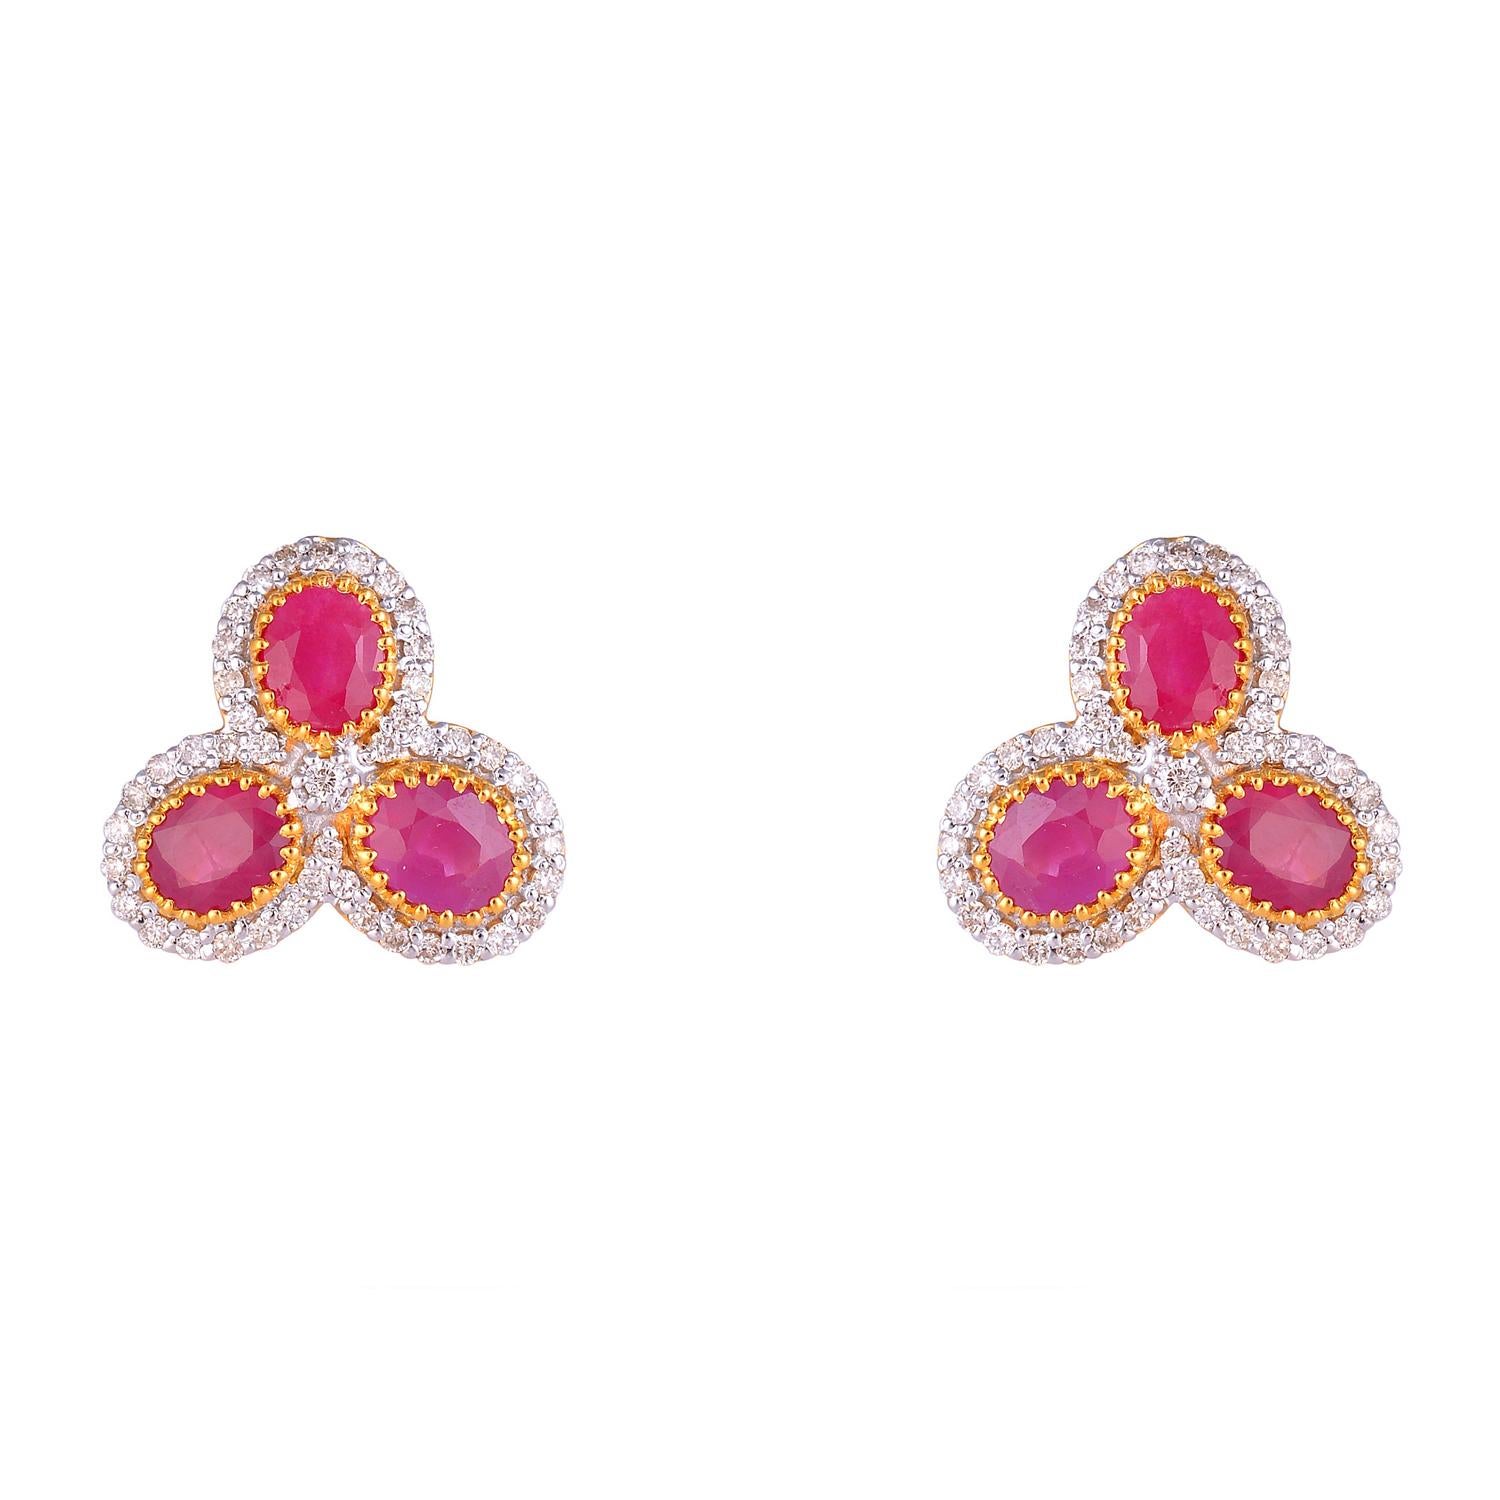 What’s more beautiful than spring bloom? These delicate floral stud earrings feature stunning ruby gemstones and 0.47 cts diamonds. Set in 14K yellow gold, this piece can be gifted to your lady love to make her melt!

Specifications

Dimensions: